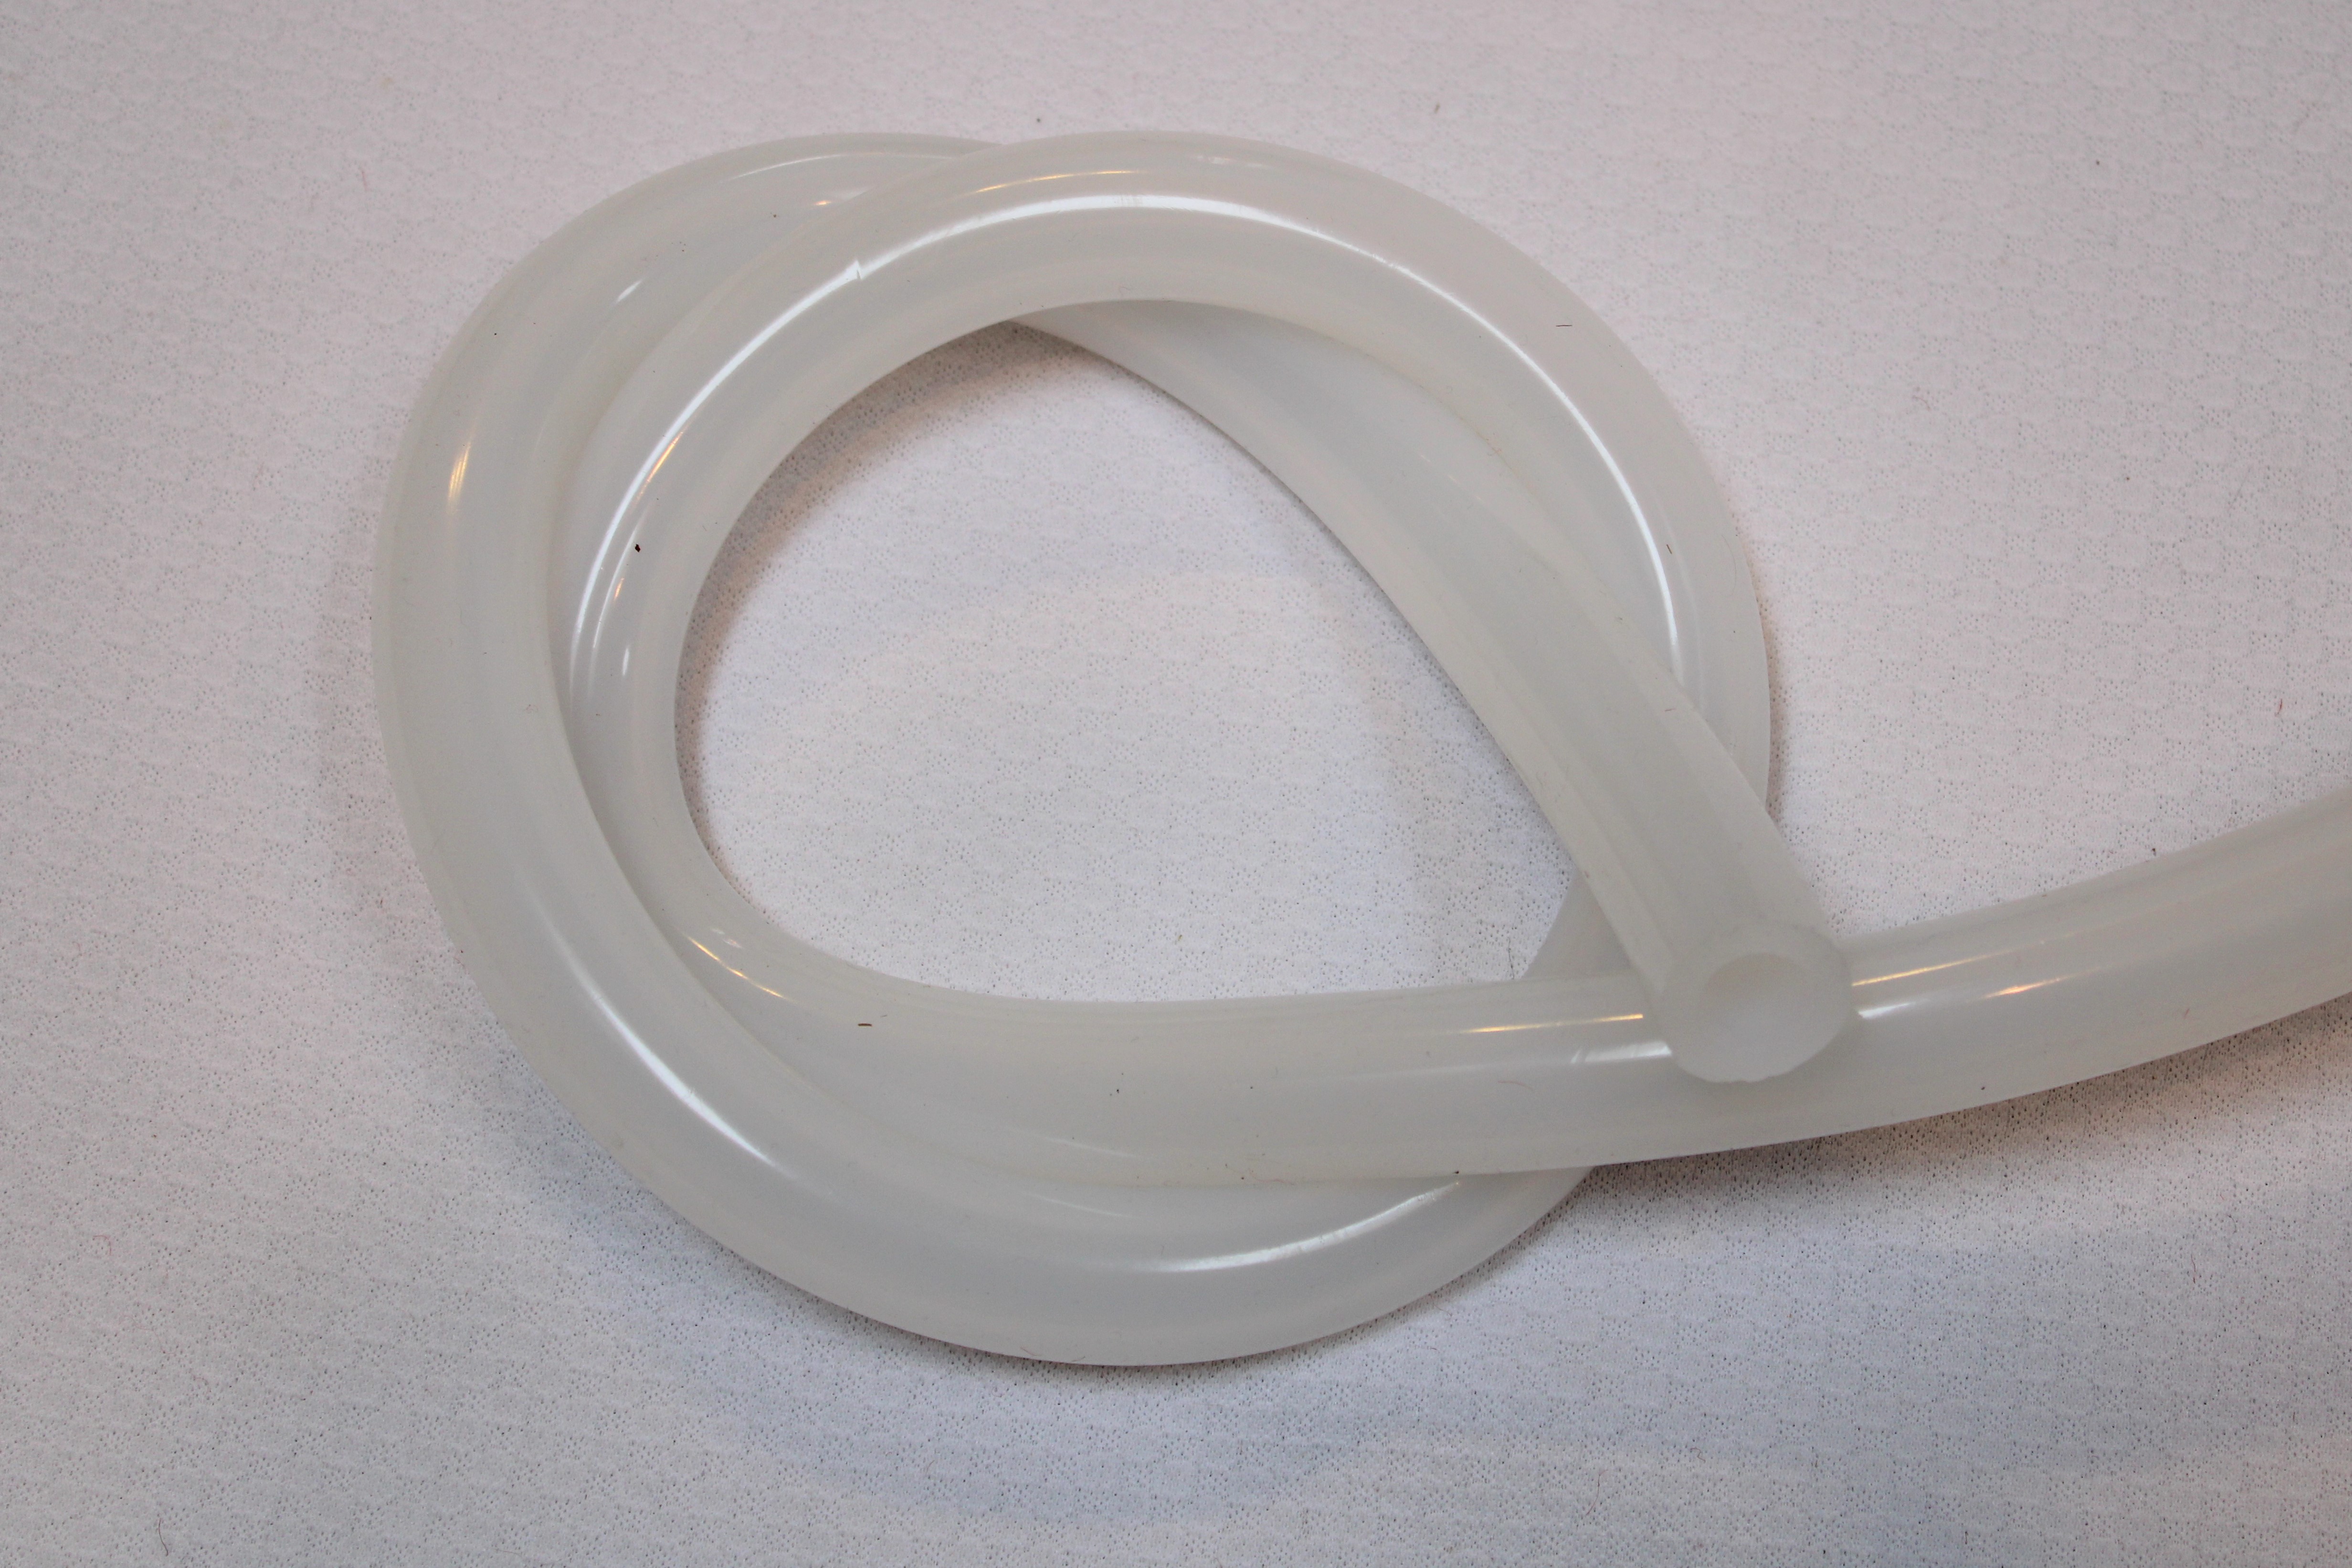 Silicone milk hose, 4 feet long for bucket milker or any other food processing applications